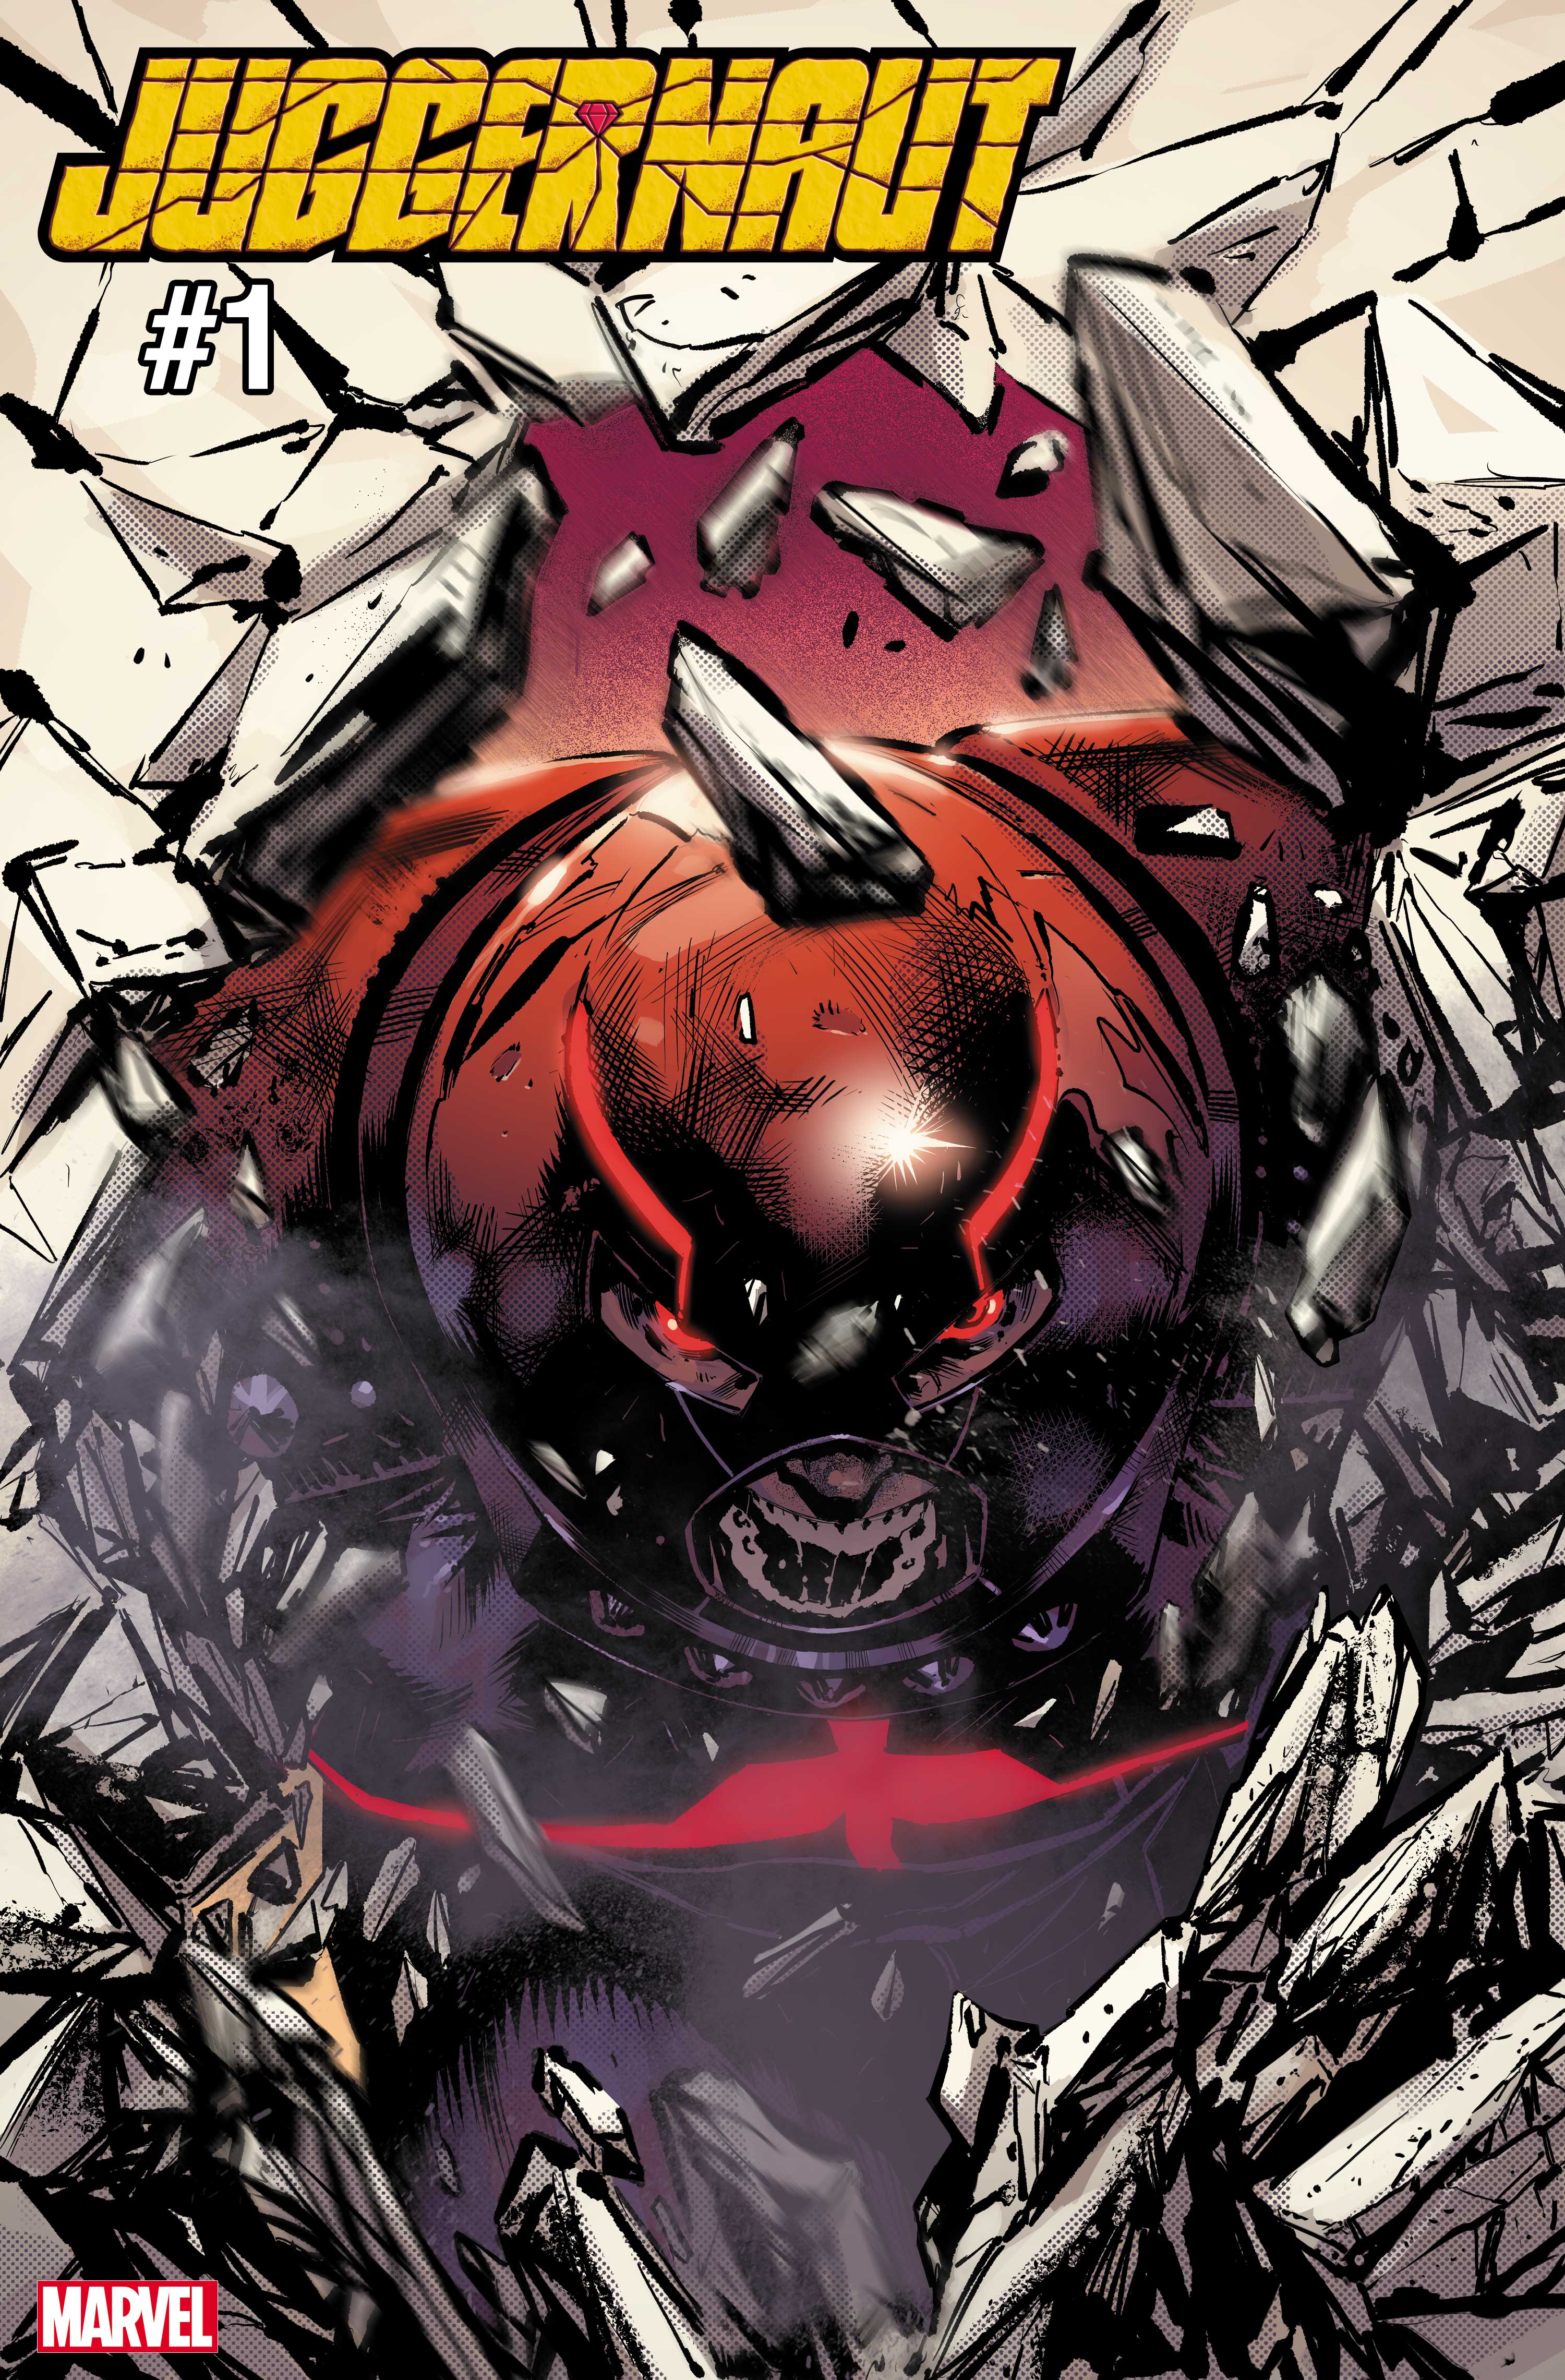 The Juggernaut Returns With New Armor and an Unlikely Ally